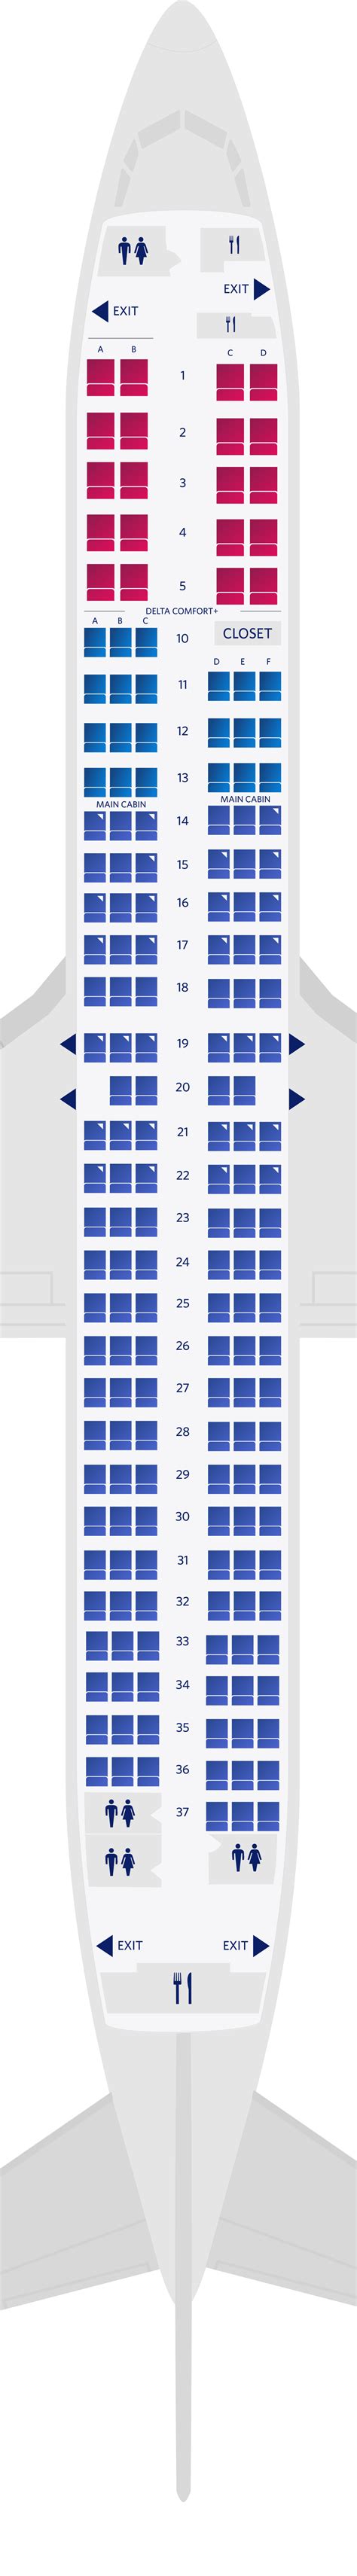 boeing 737-900 seating chart united